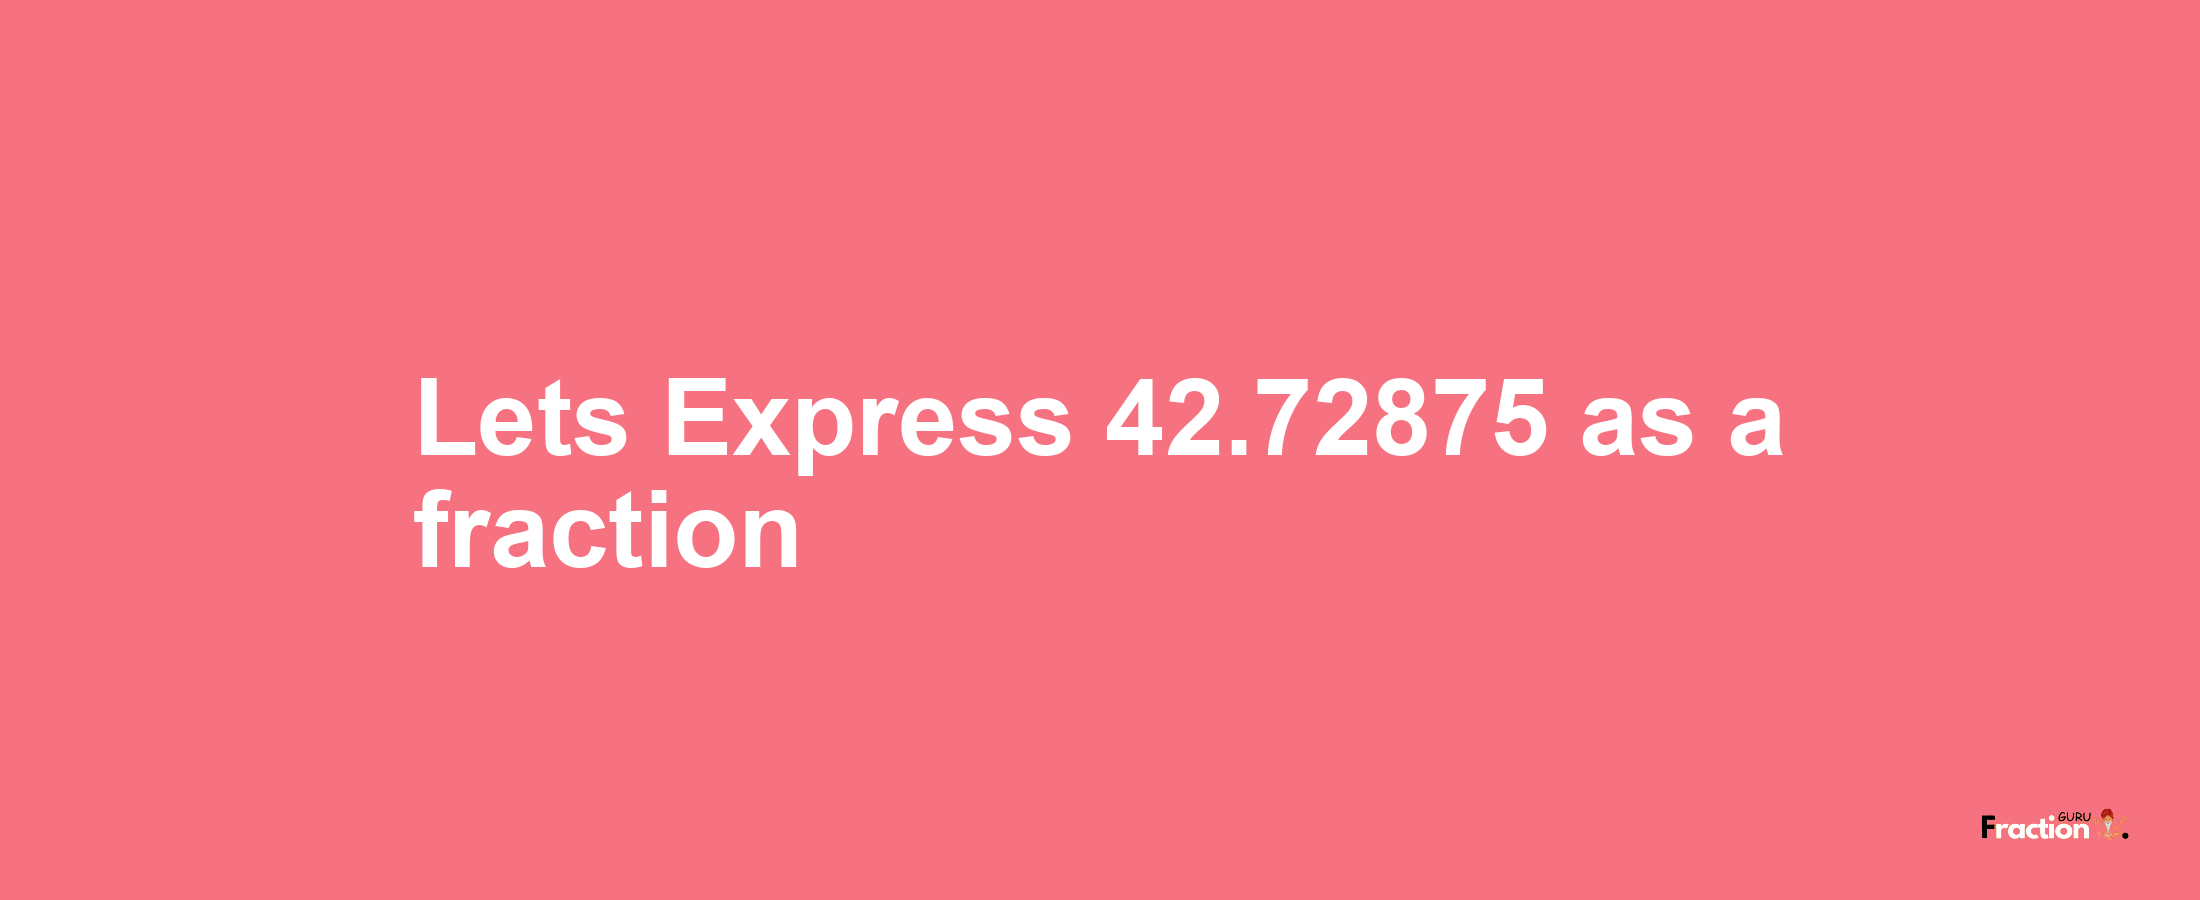 Lets Express 42.72875 as afraction